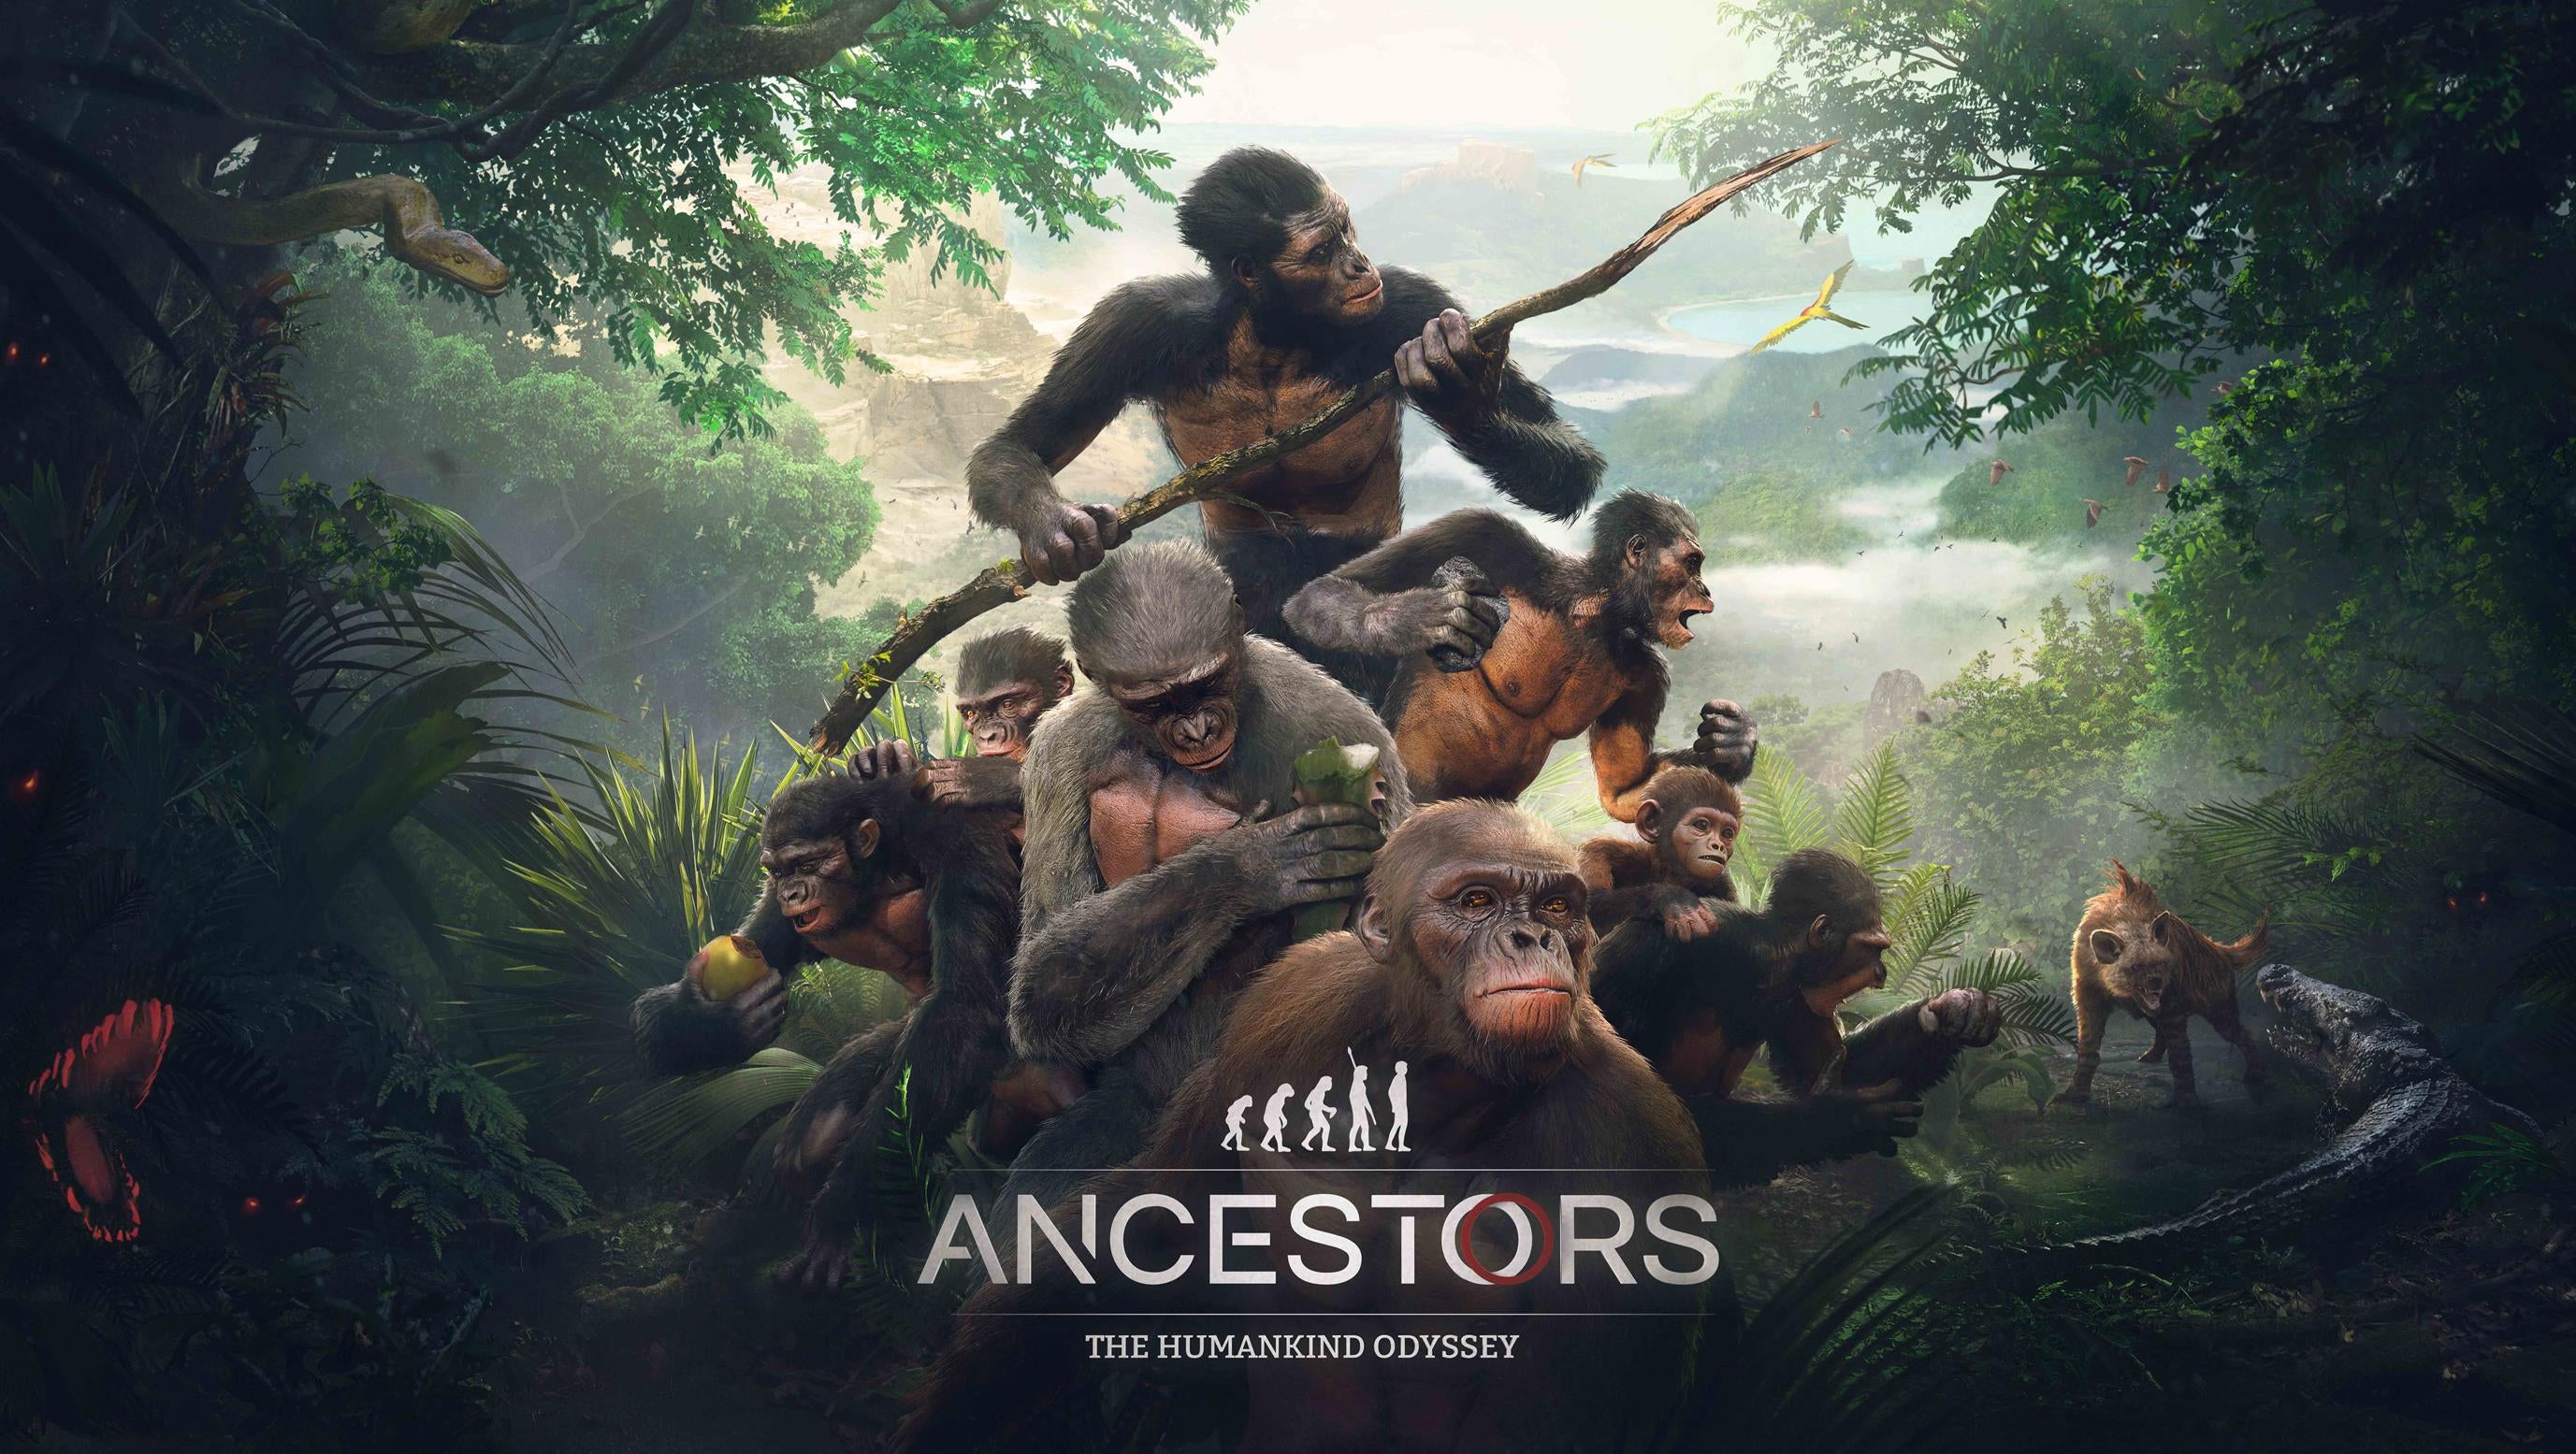 Image for Ancestors: The Humankind Odyssey hits PC this August